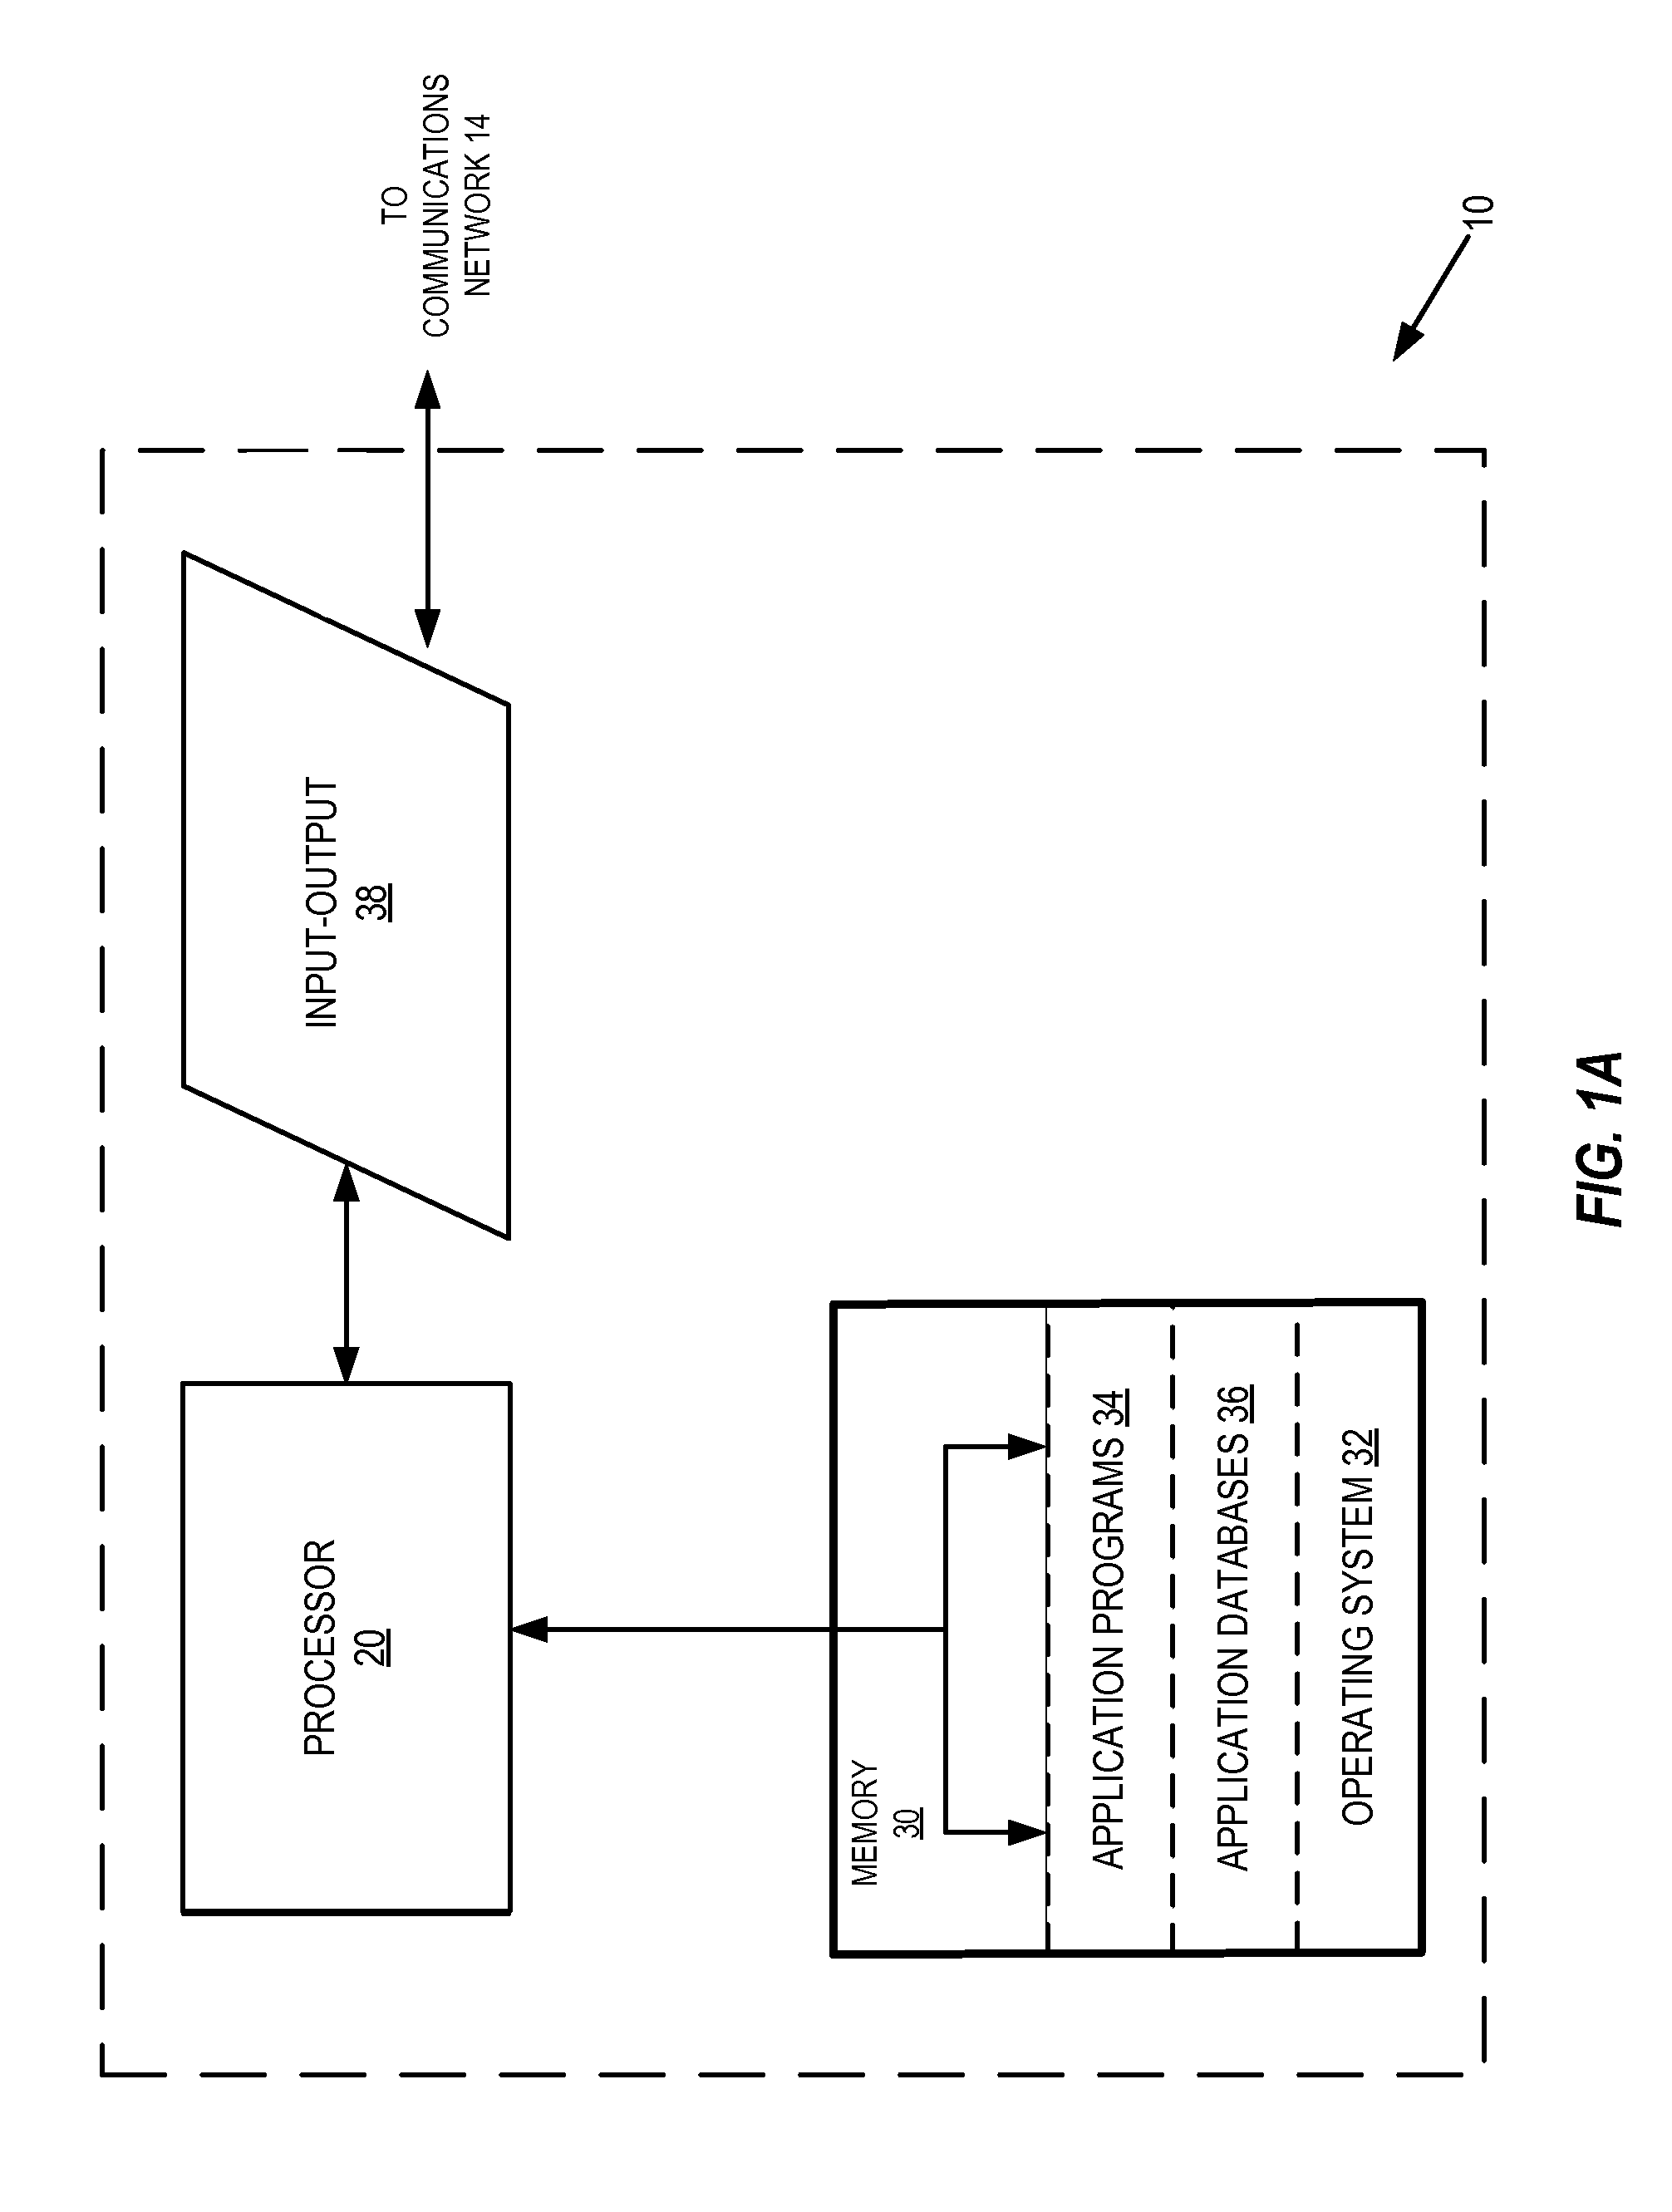 System and method for assessing and improving a users life skills and self-efficacy for life stage readiness